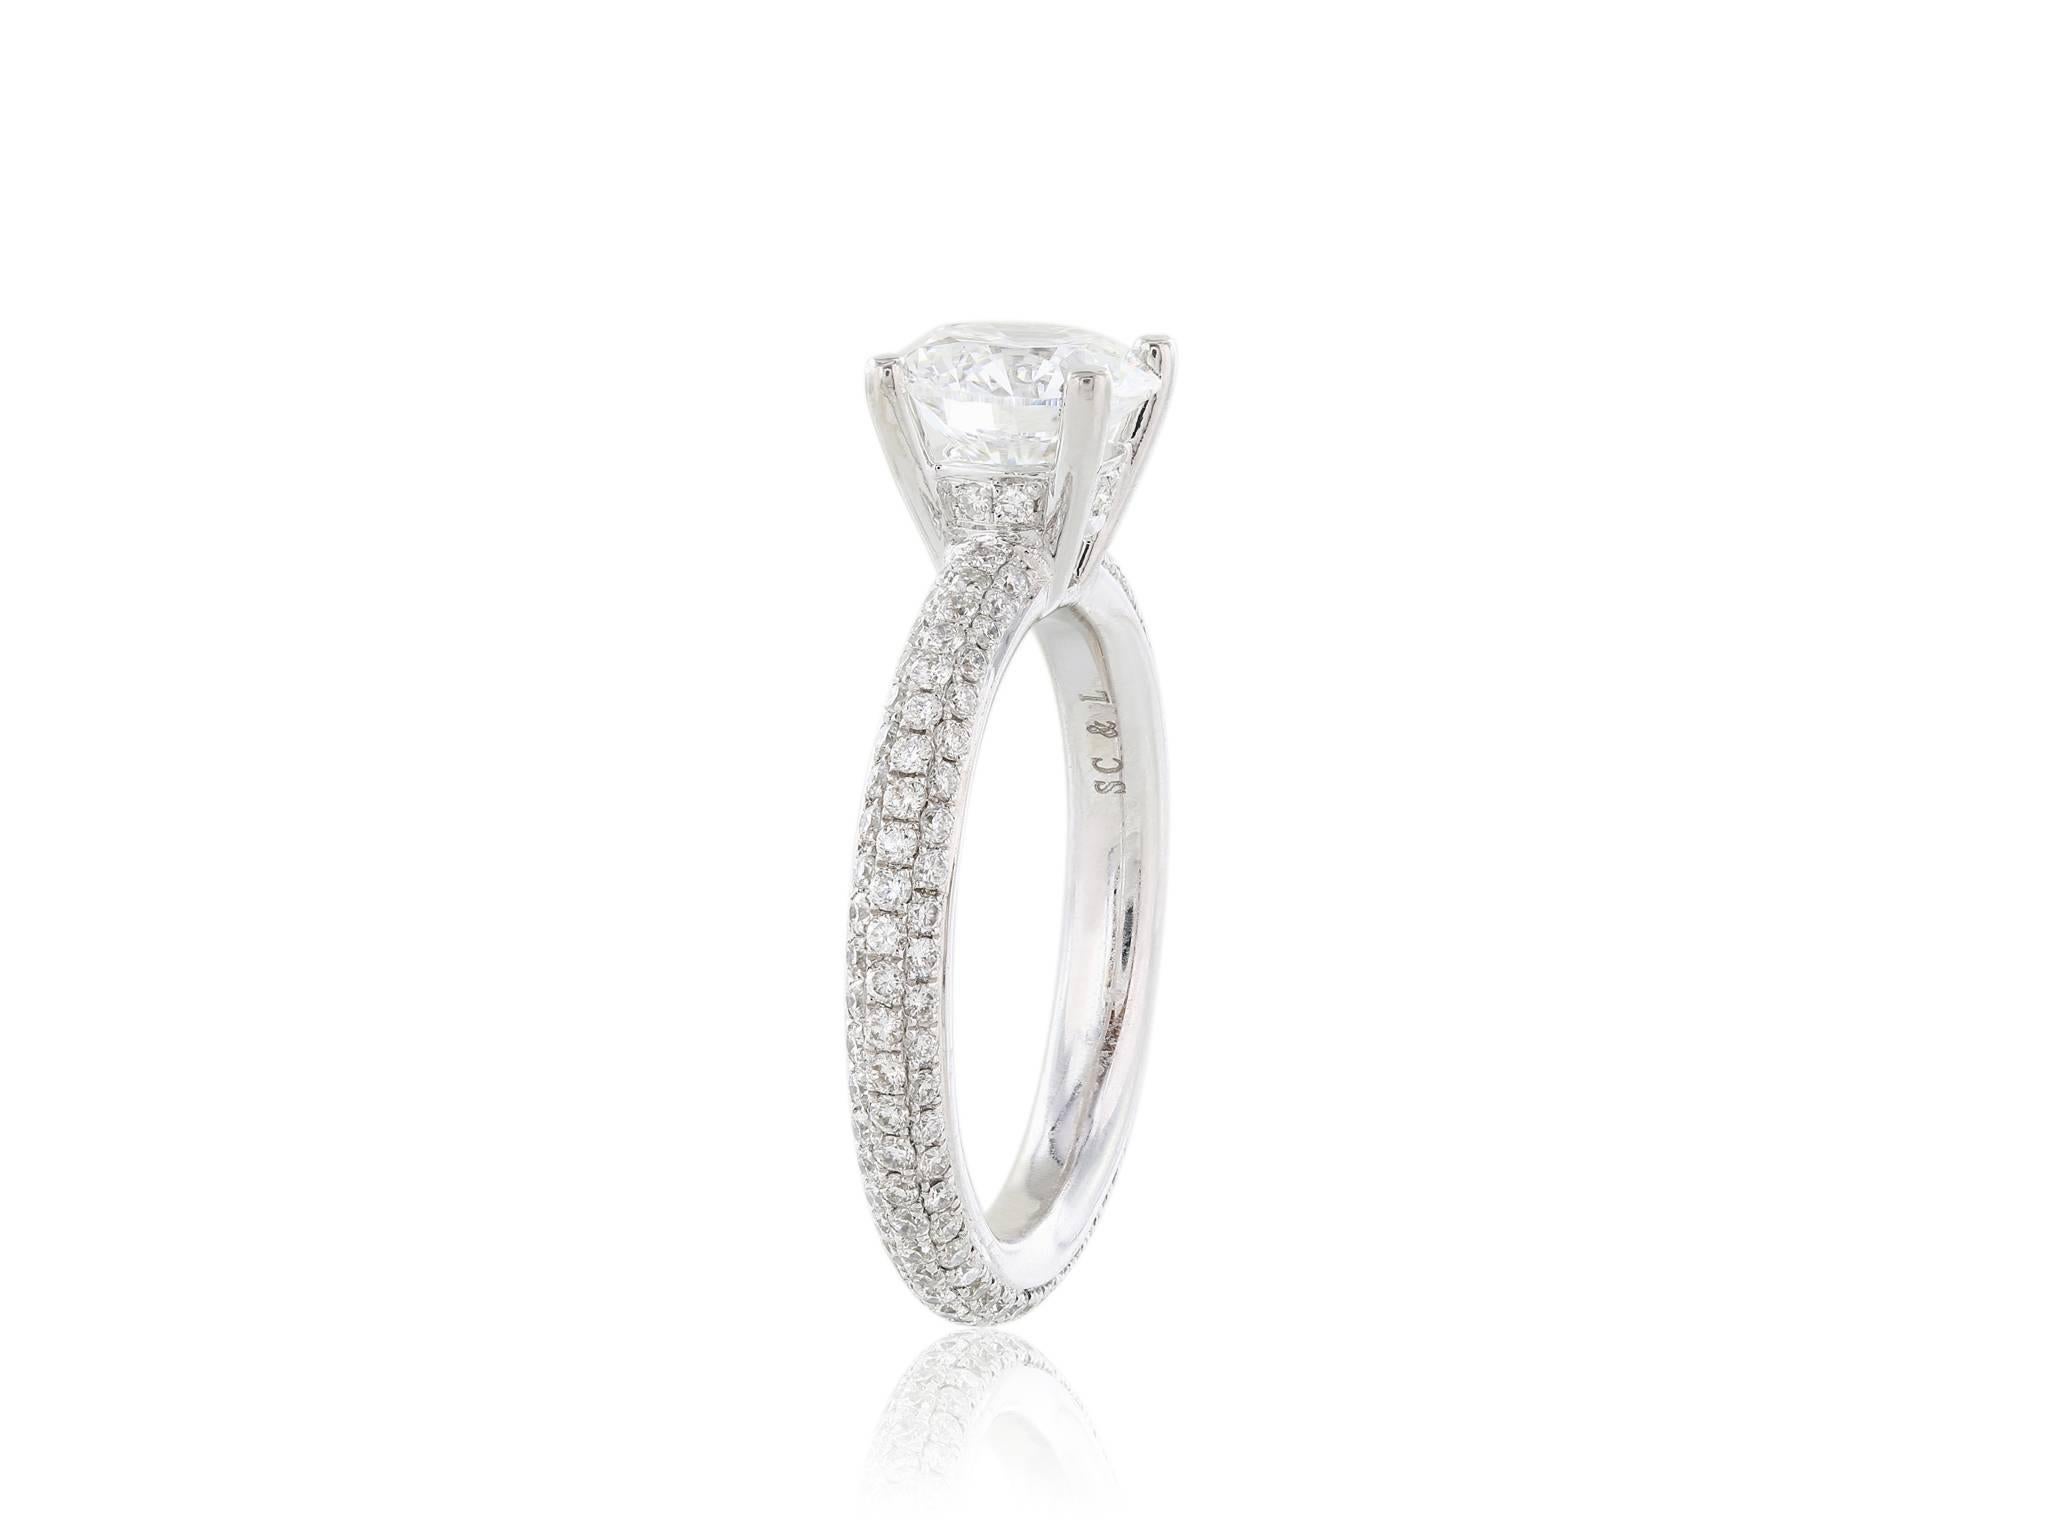 1.64 Round brilliant cut diamond ring with a color of F and a clarity of SI1.  The diamond is set in a micro pave eternity band with a total weight of .89 carats. GIA cert. 13344336 in a platinum mounting